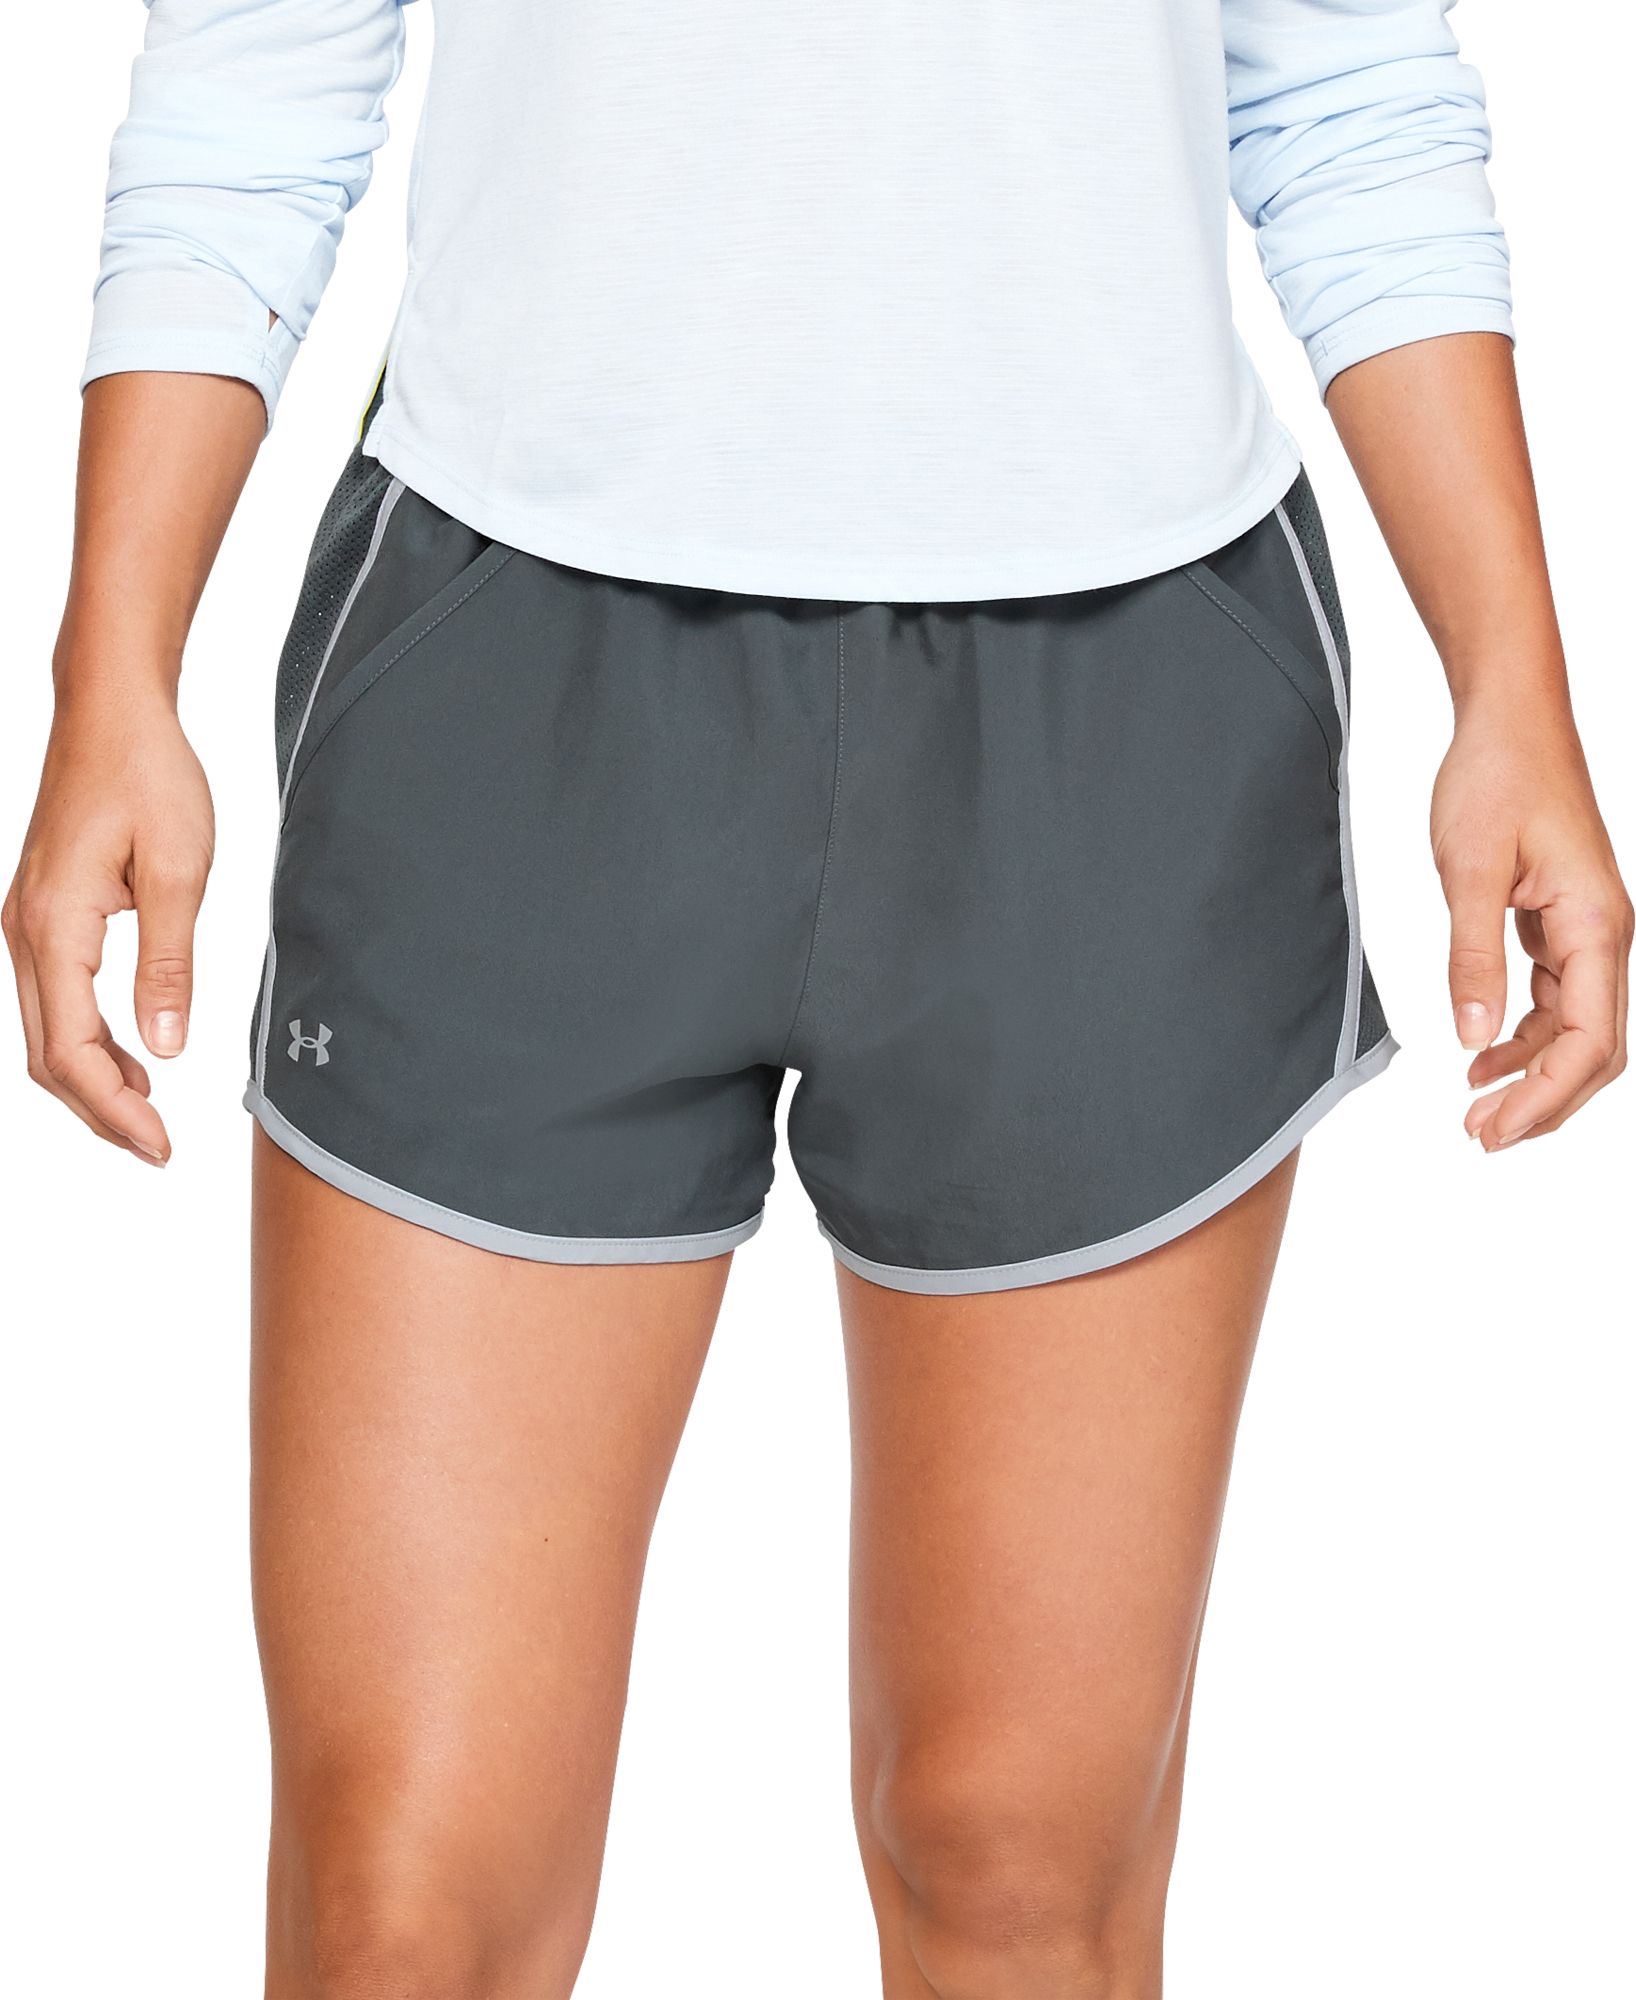 women's under armour shorts clearance